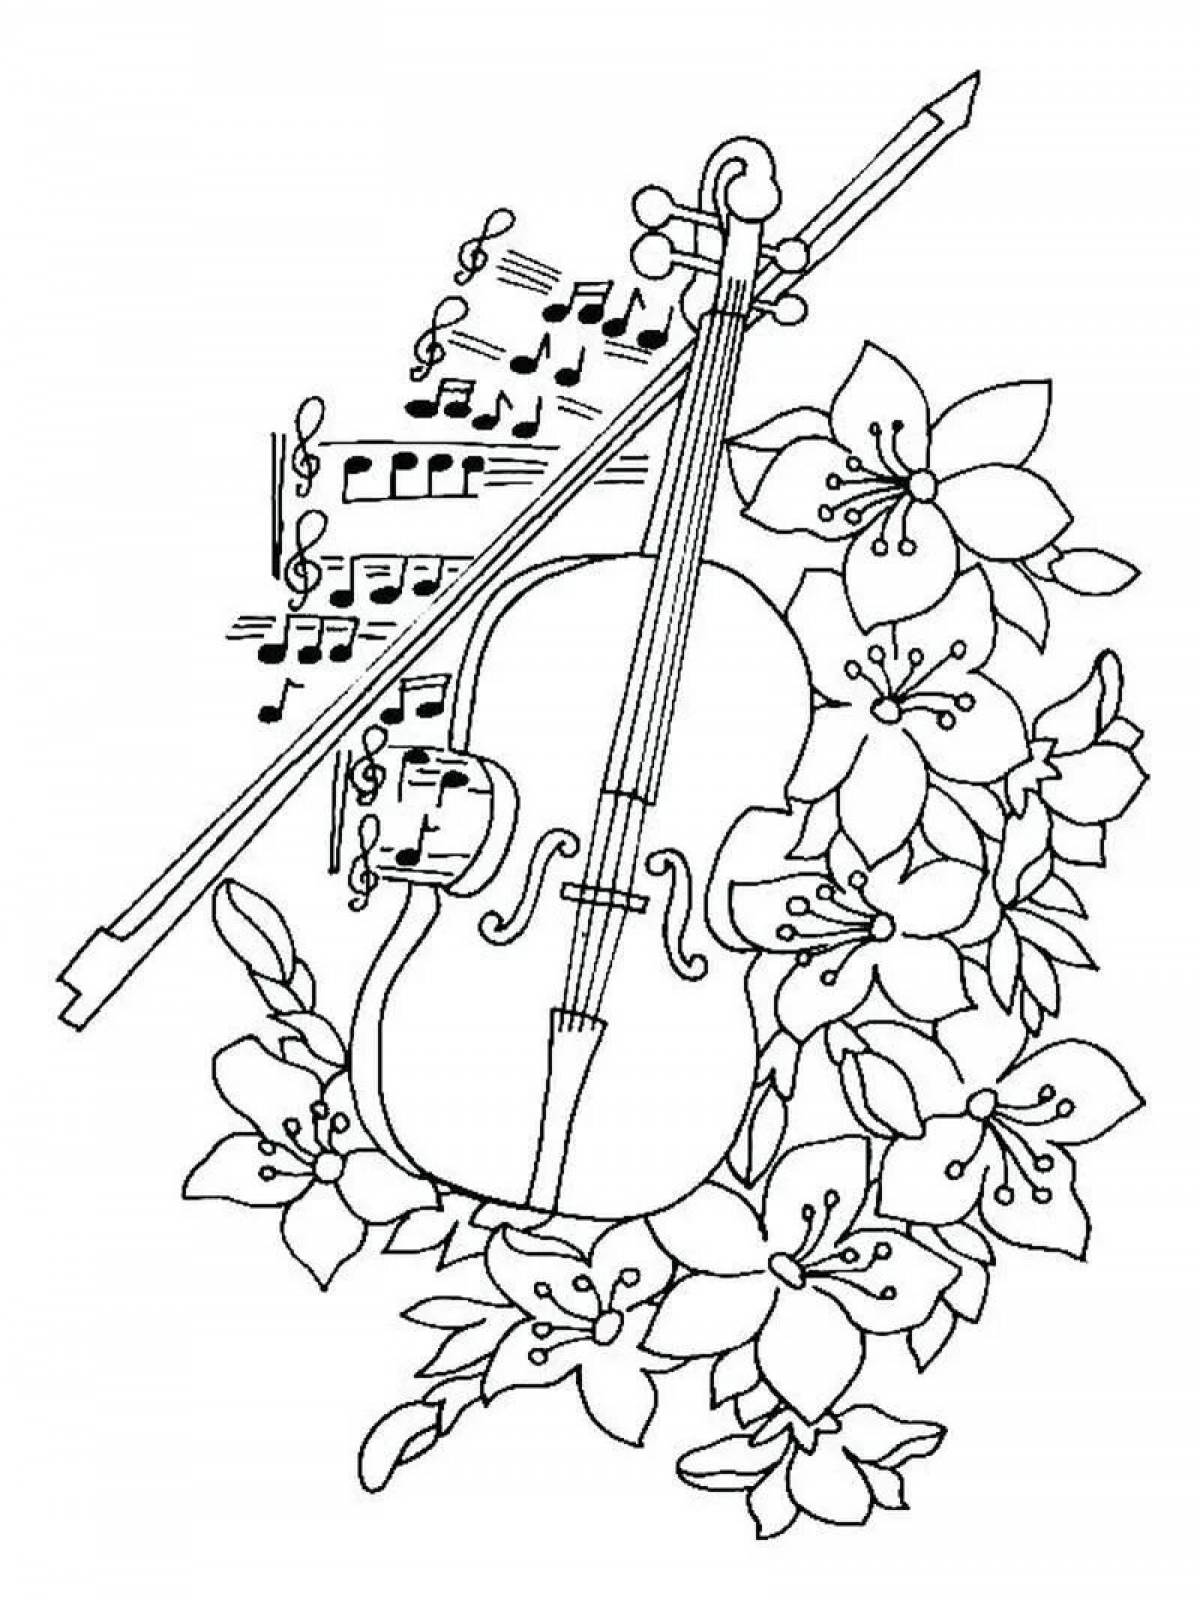 Exciting coloring page melody